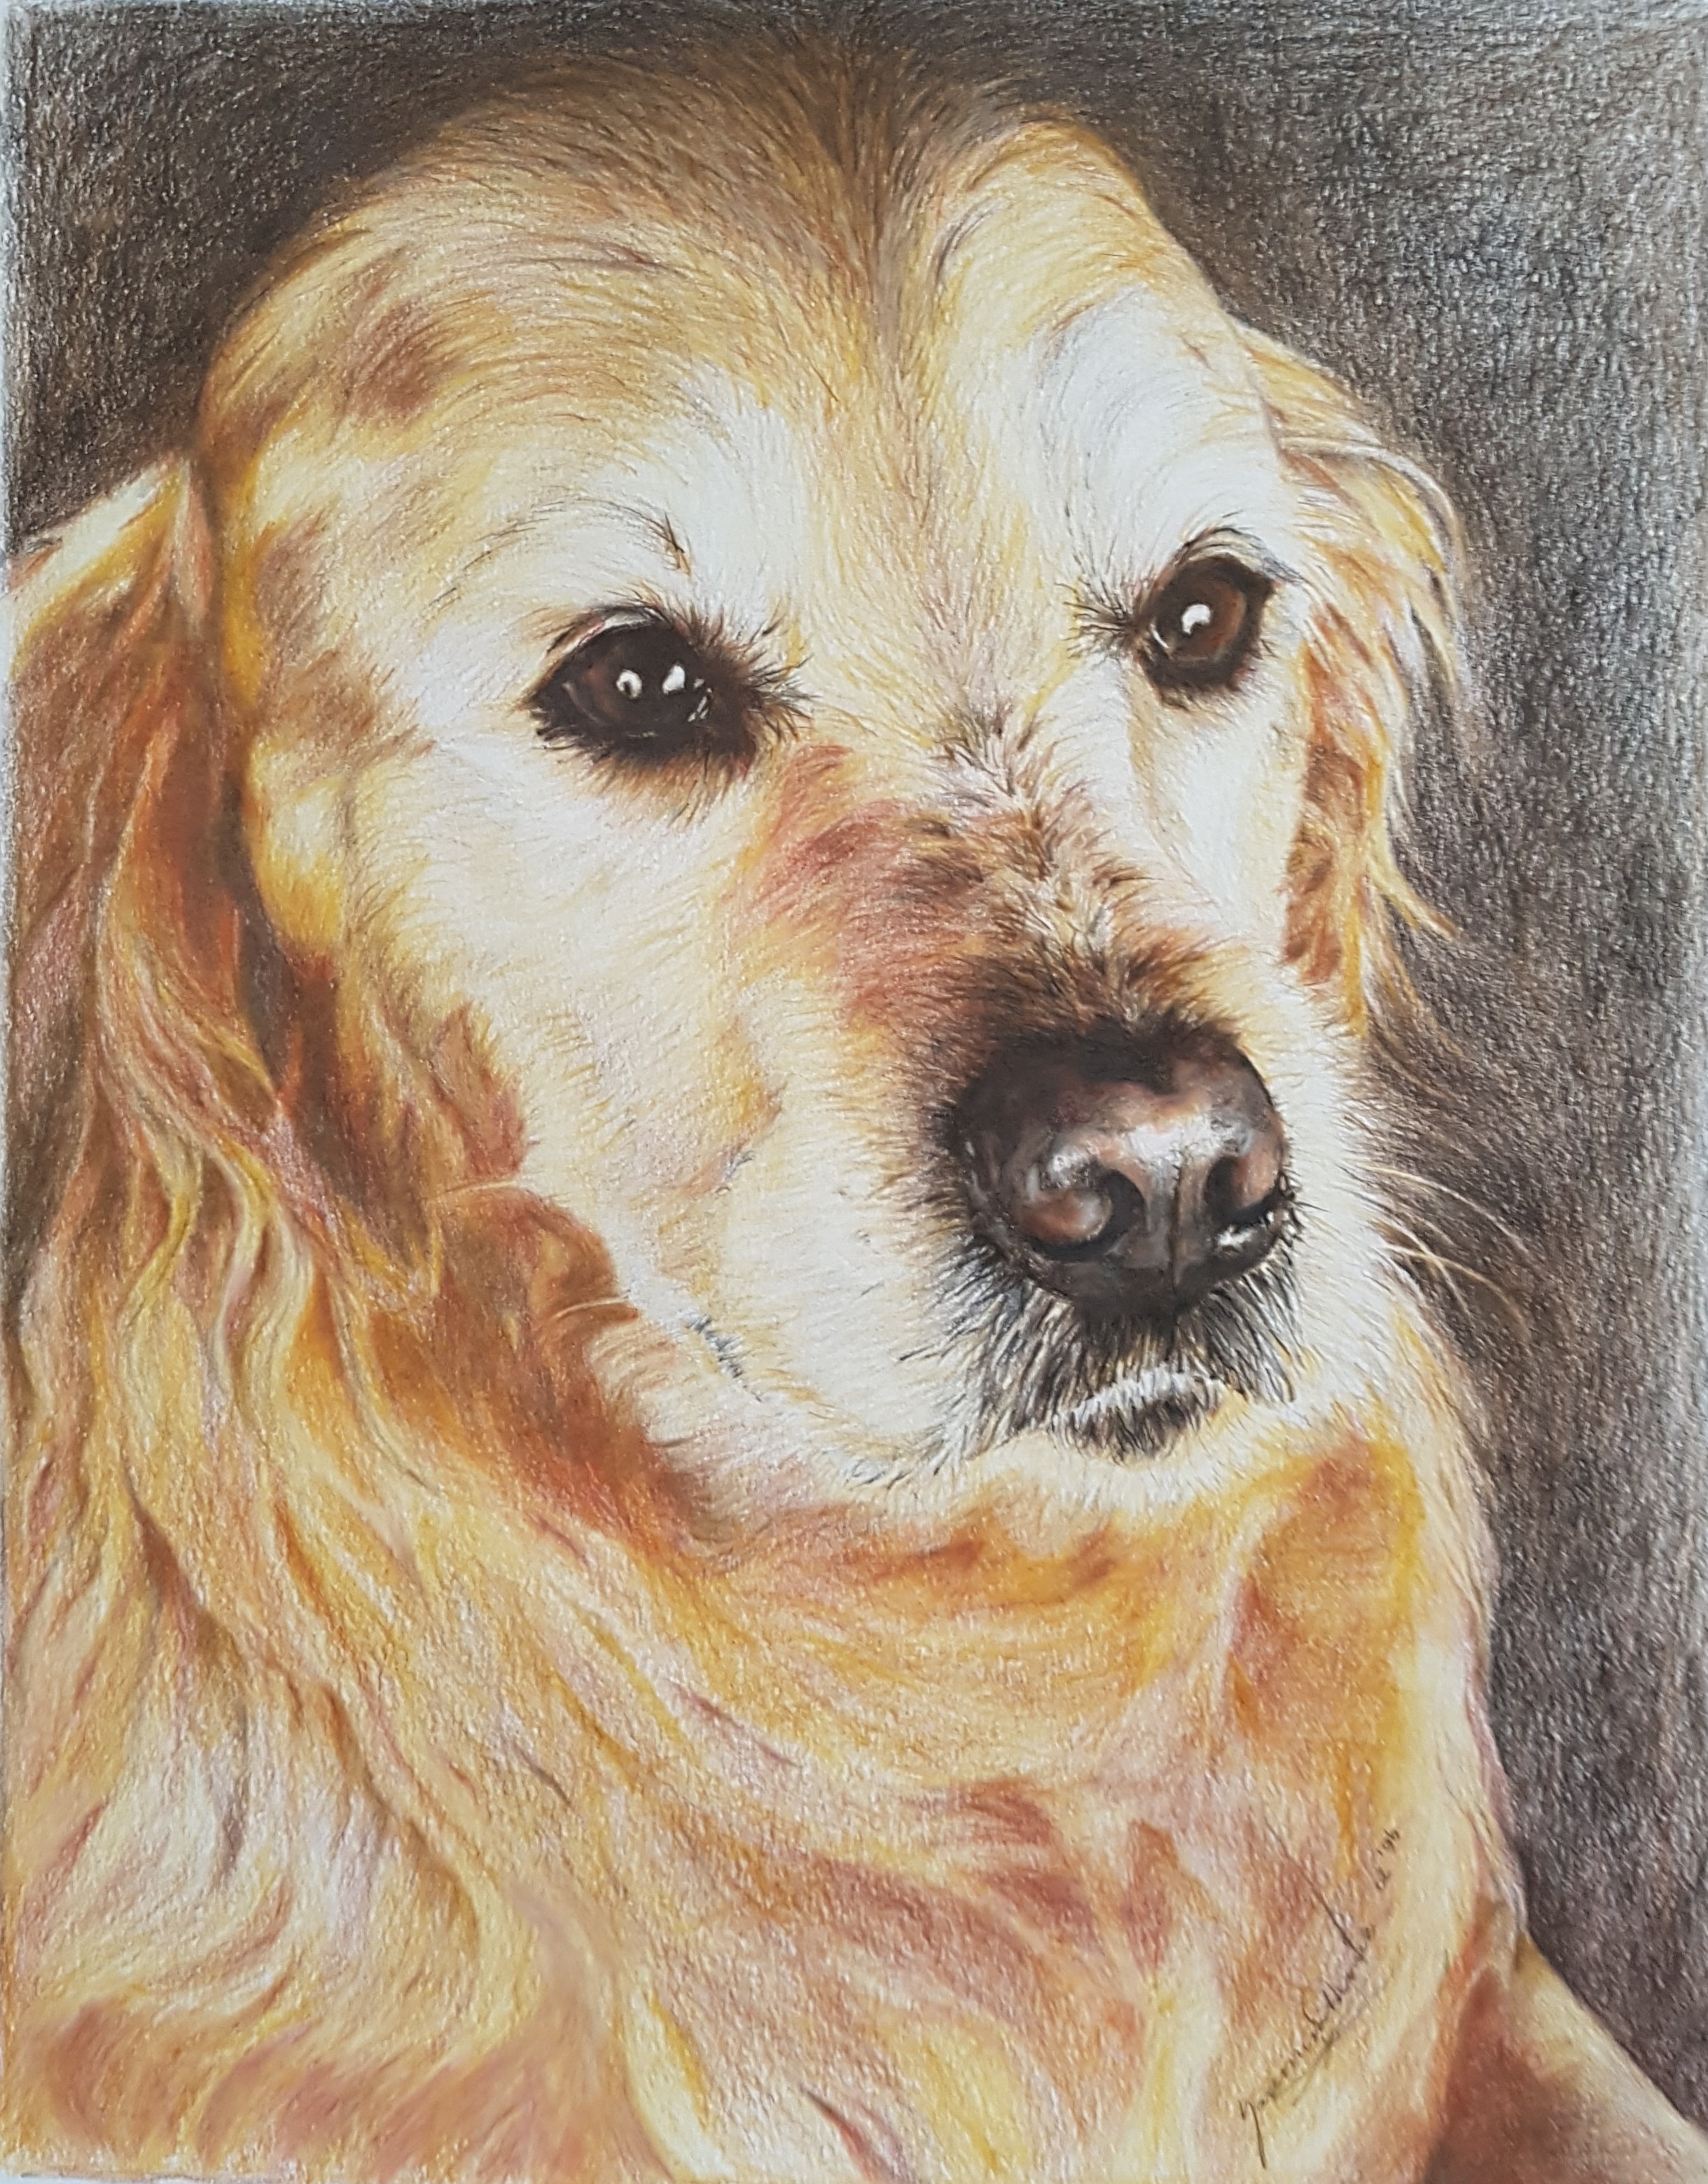 "Golden", 12 x 15", Coloured Pencil on Paper, $325